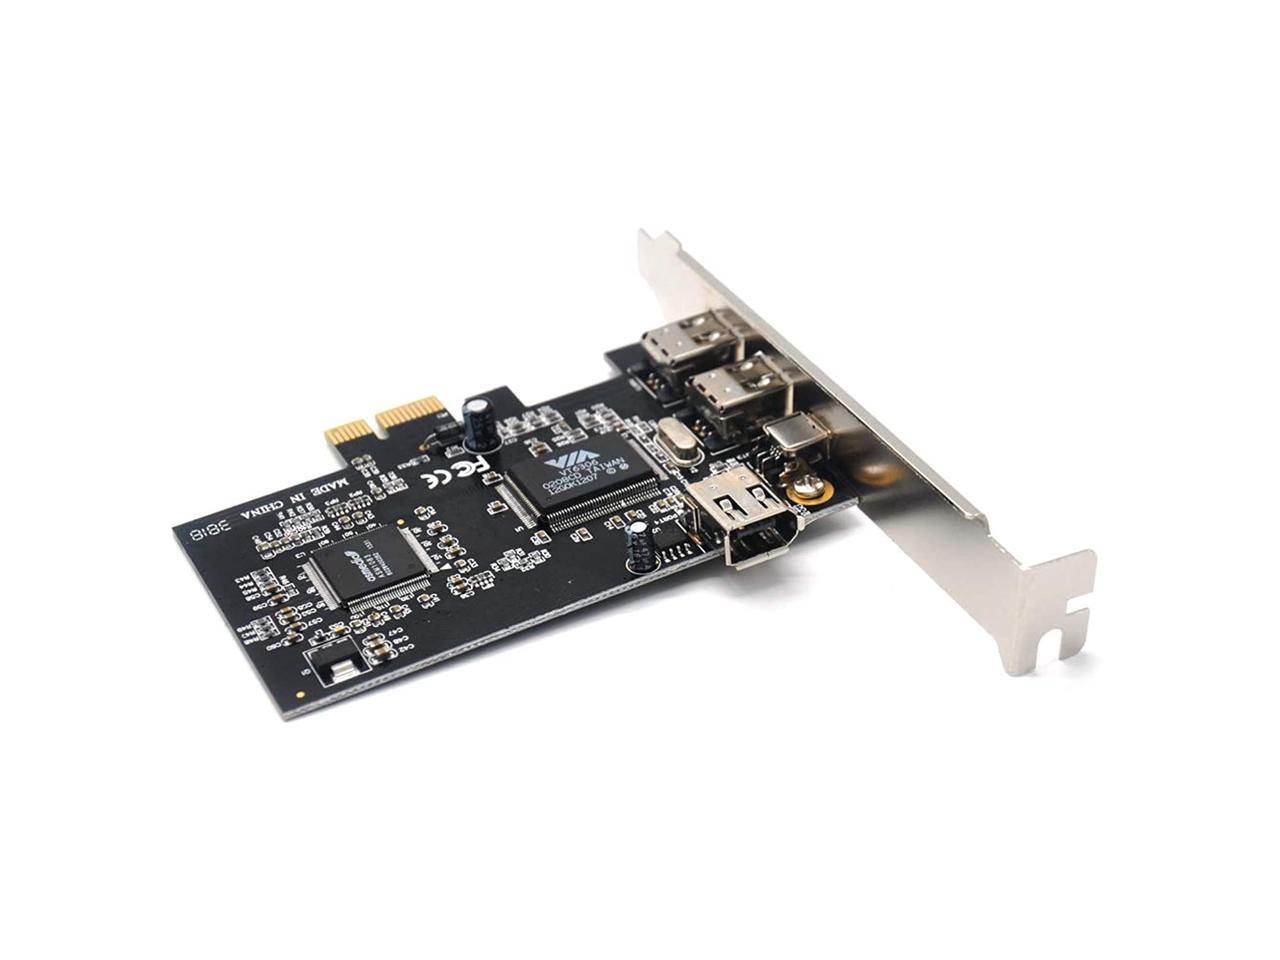 for Desktop PC and DV Connection QNINE PCIe 3 Ports 1394A Firewire Expansion Card 1X to External IEEE 1394 Adapter Controller PCI Express 2 x 6 Pin + 1 x 4 Pin 